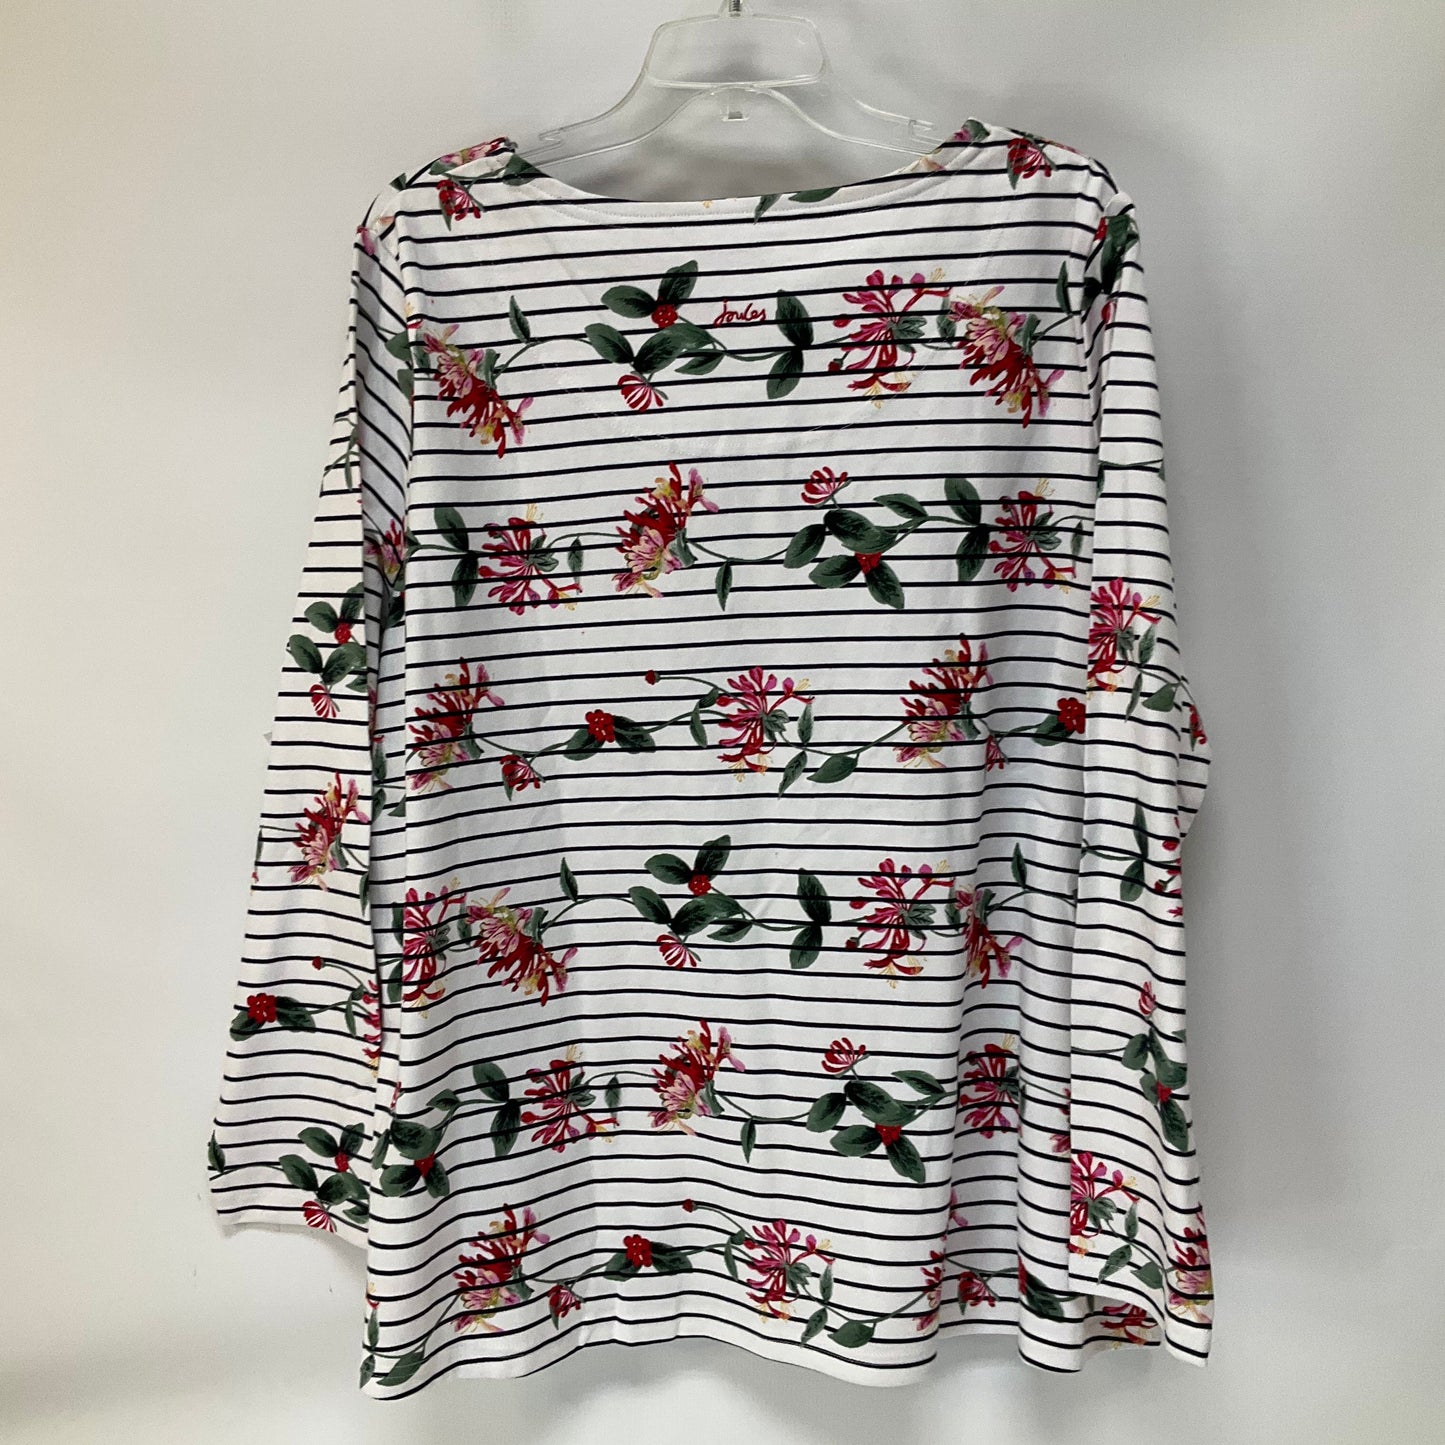 Striped Pattern Top Long Sleeve Joules, Size M